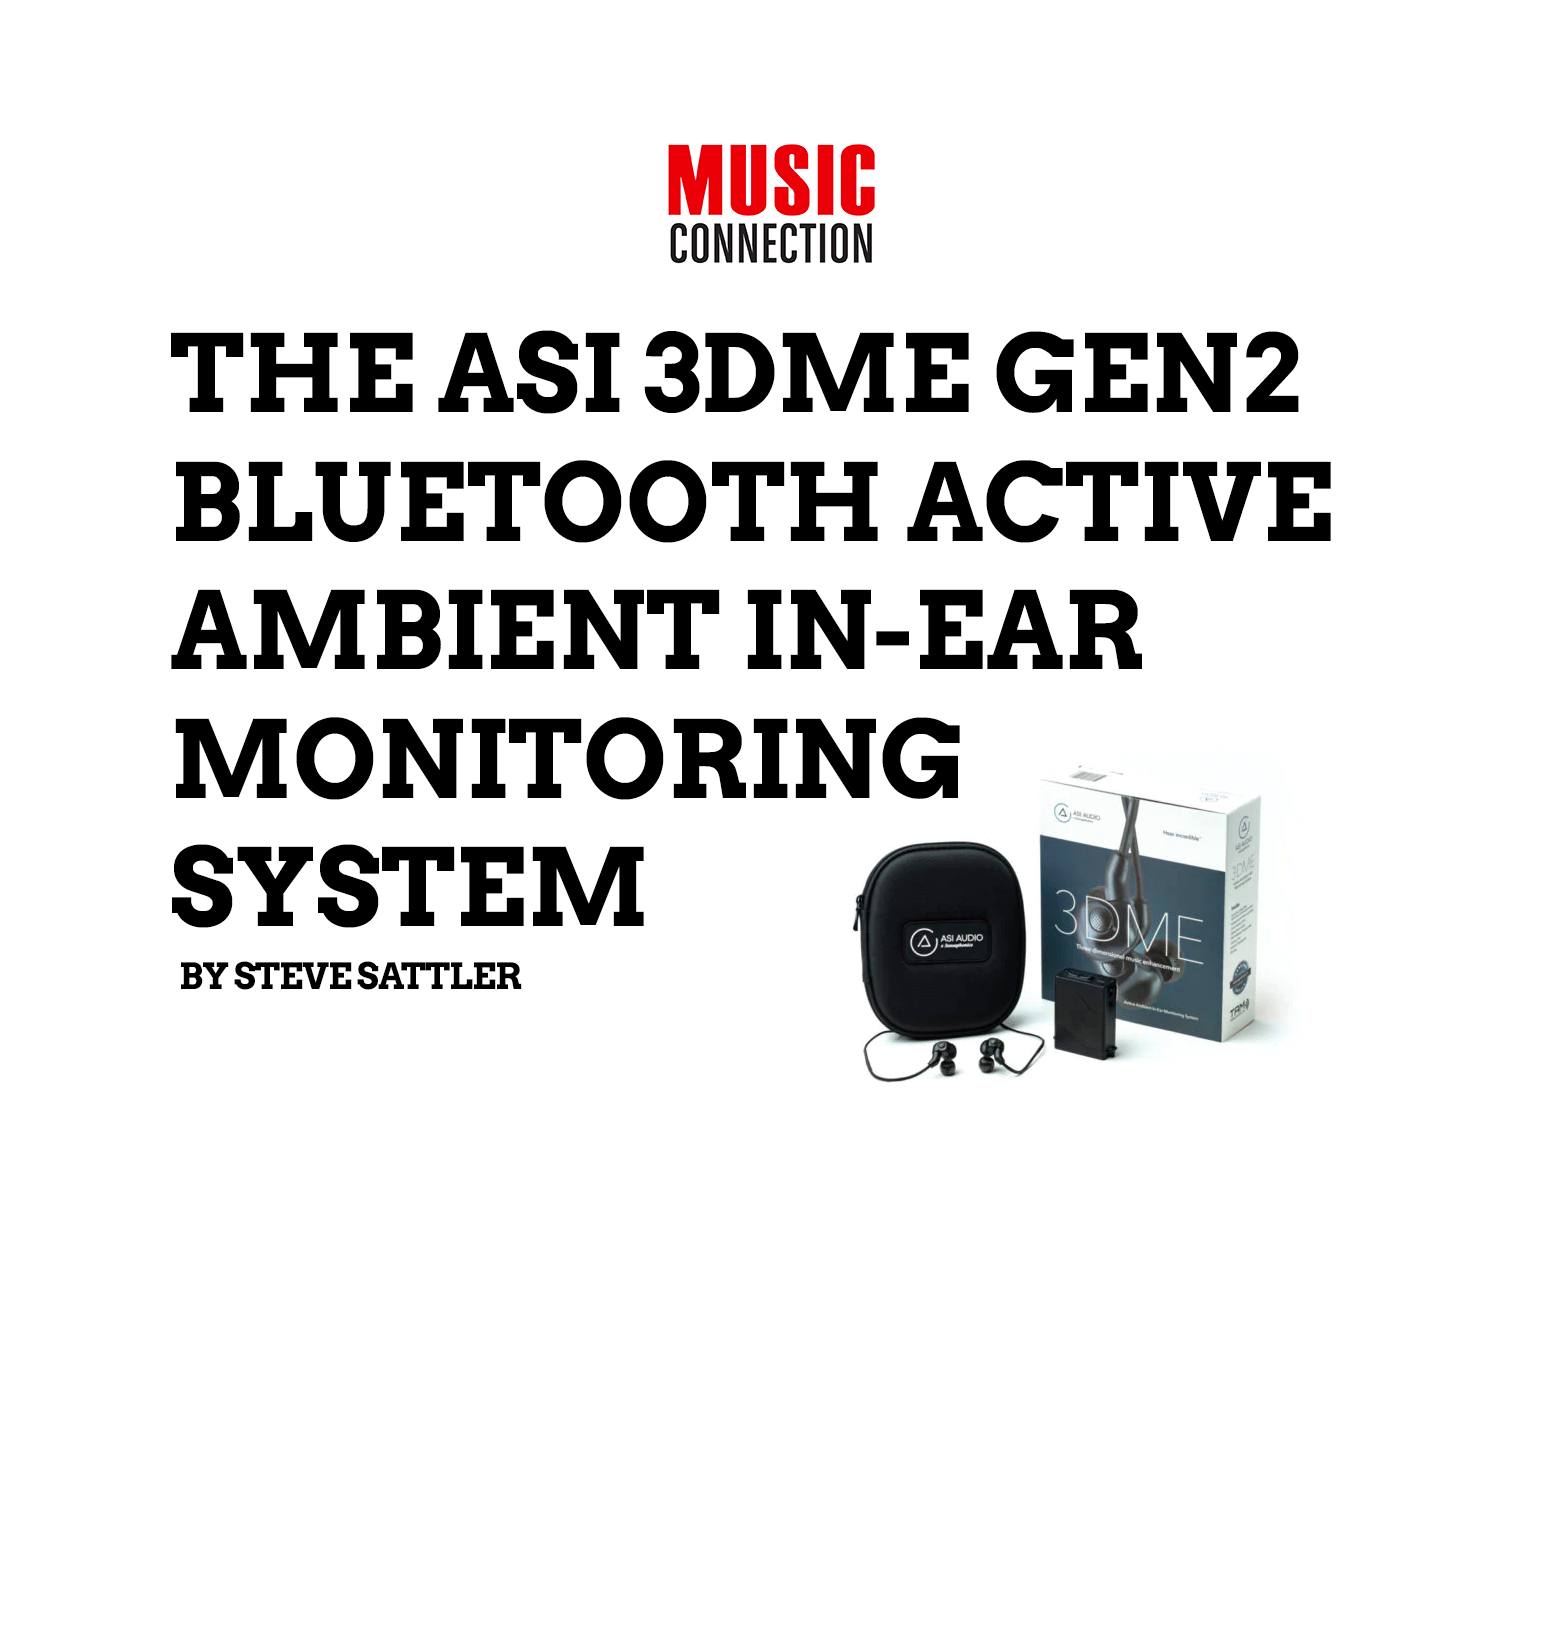 Music Connection’s Steve Sattler checks out the ASI 3DME GEN2 Bluetooth Active Ambient In-Ear Monitoring System